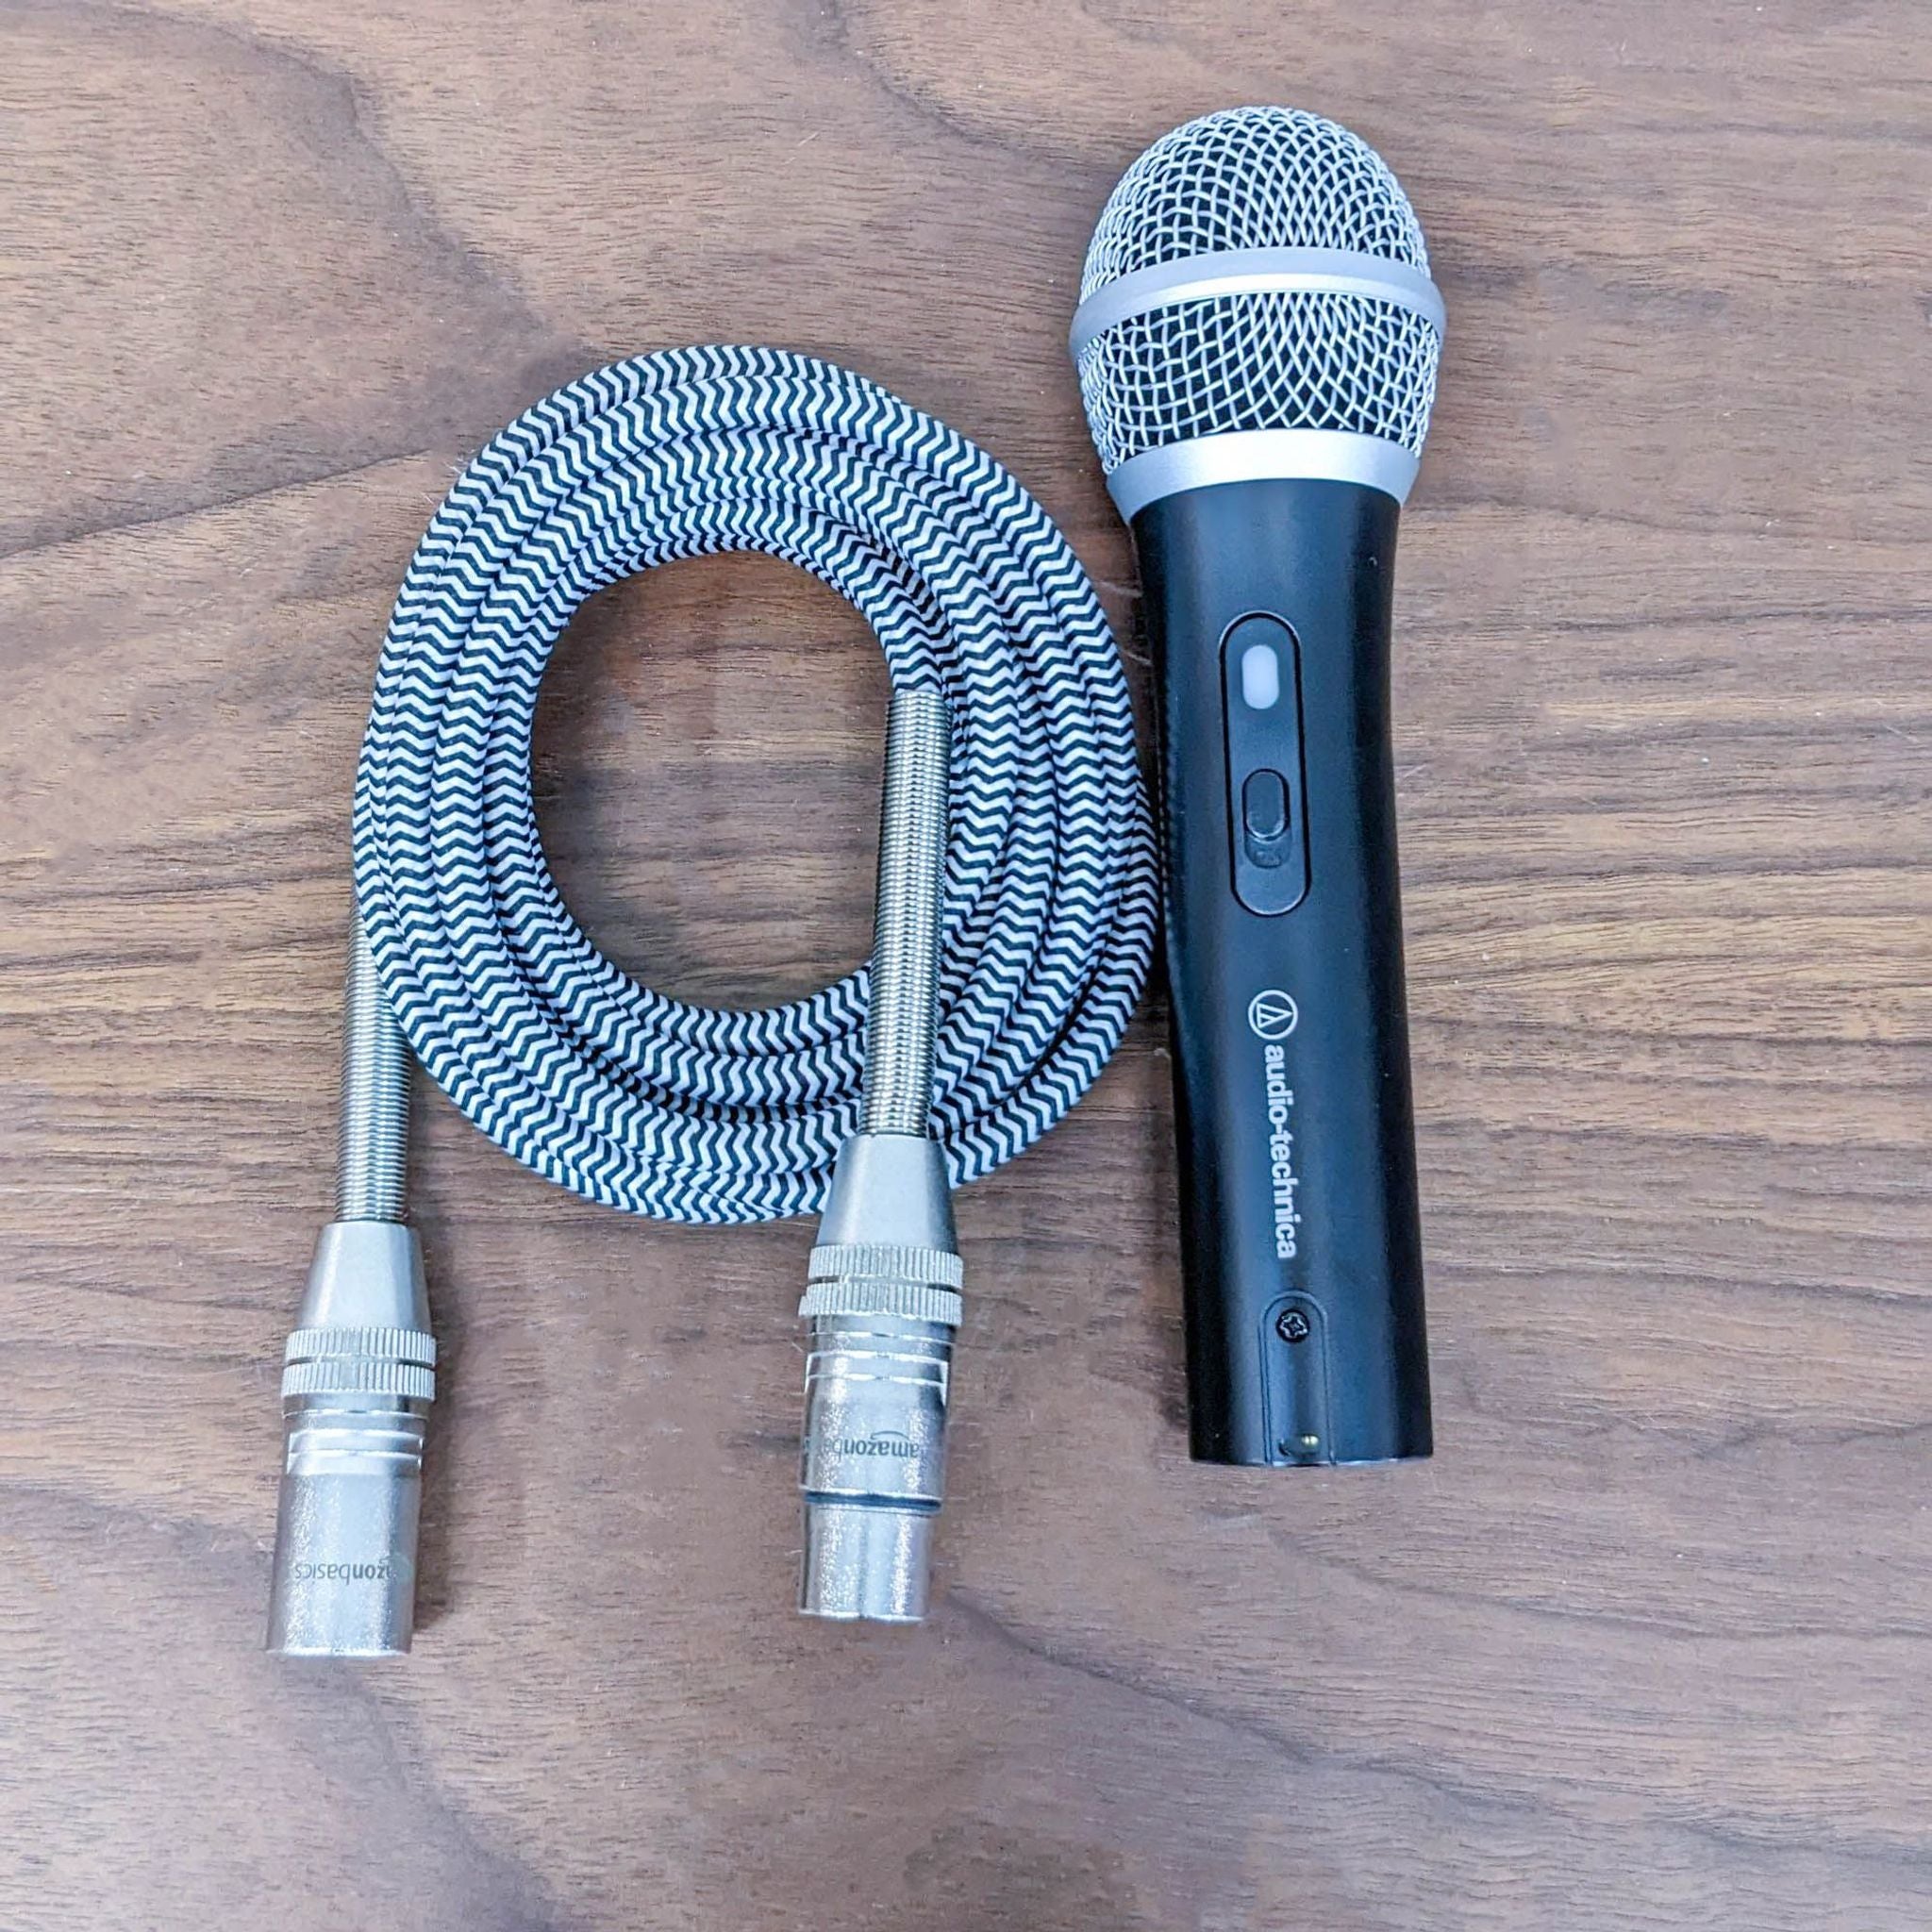 Audio-Technica microphone with XLR connectors and braided cable on a wooden surface, ideal for recording and streaming.